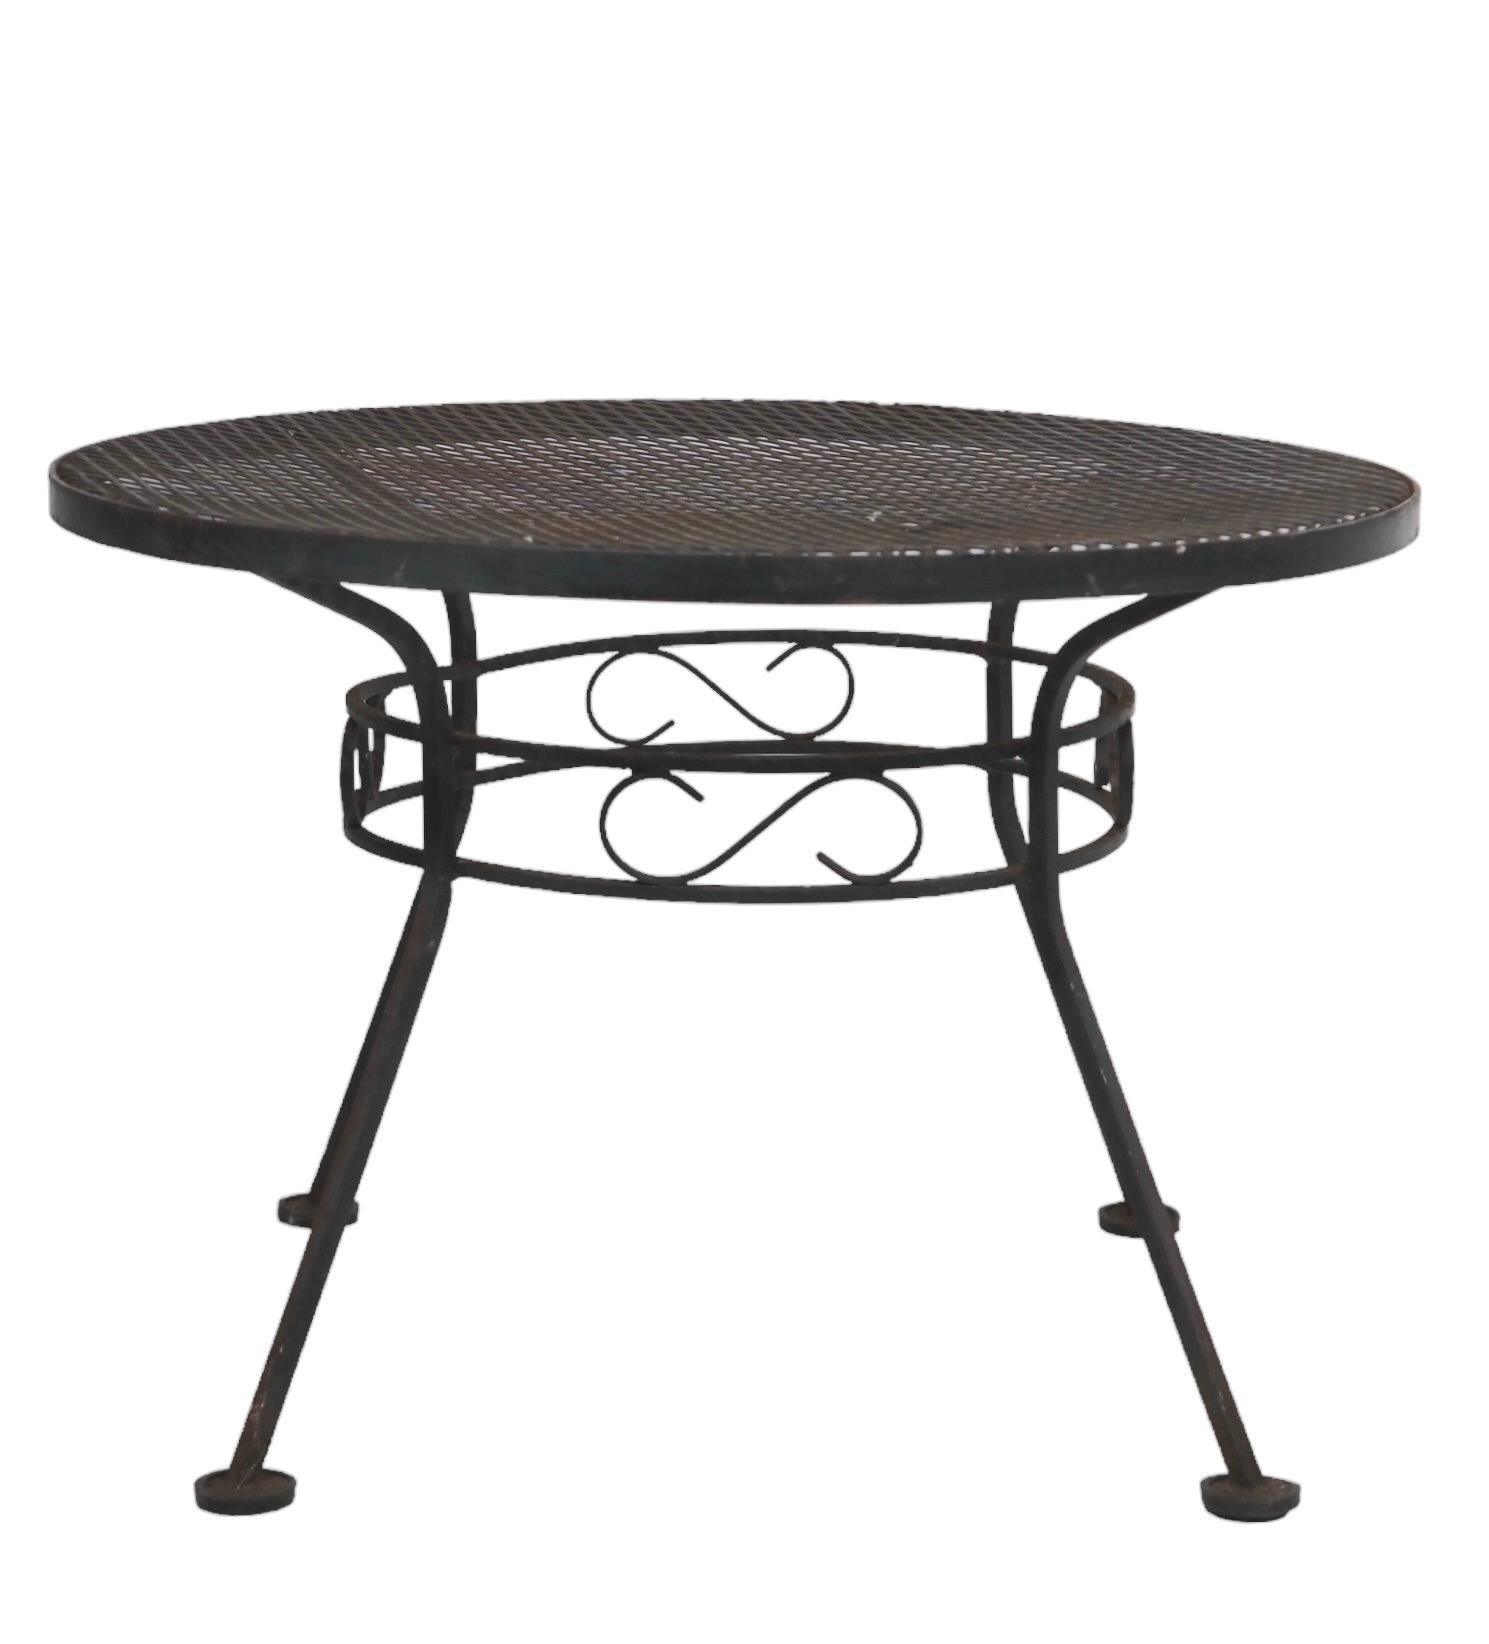  Small Wrought Iron  Garden Patio Poolside Table by Woodard c. 1940/60's For Sale 3